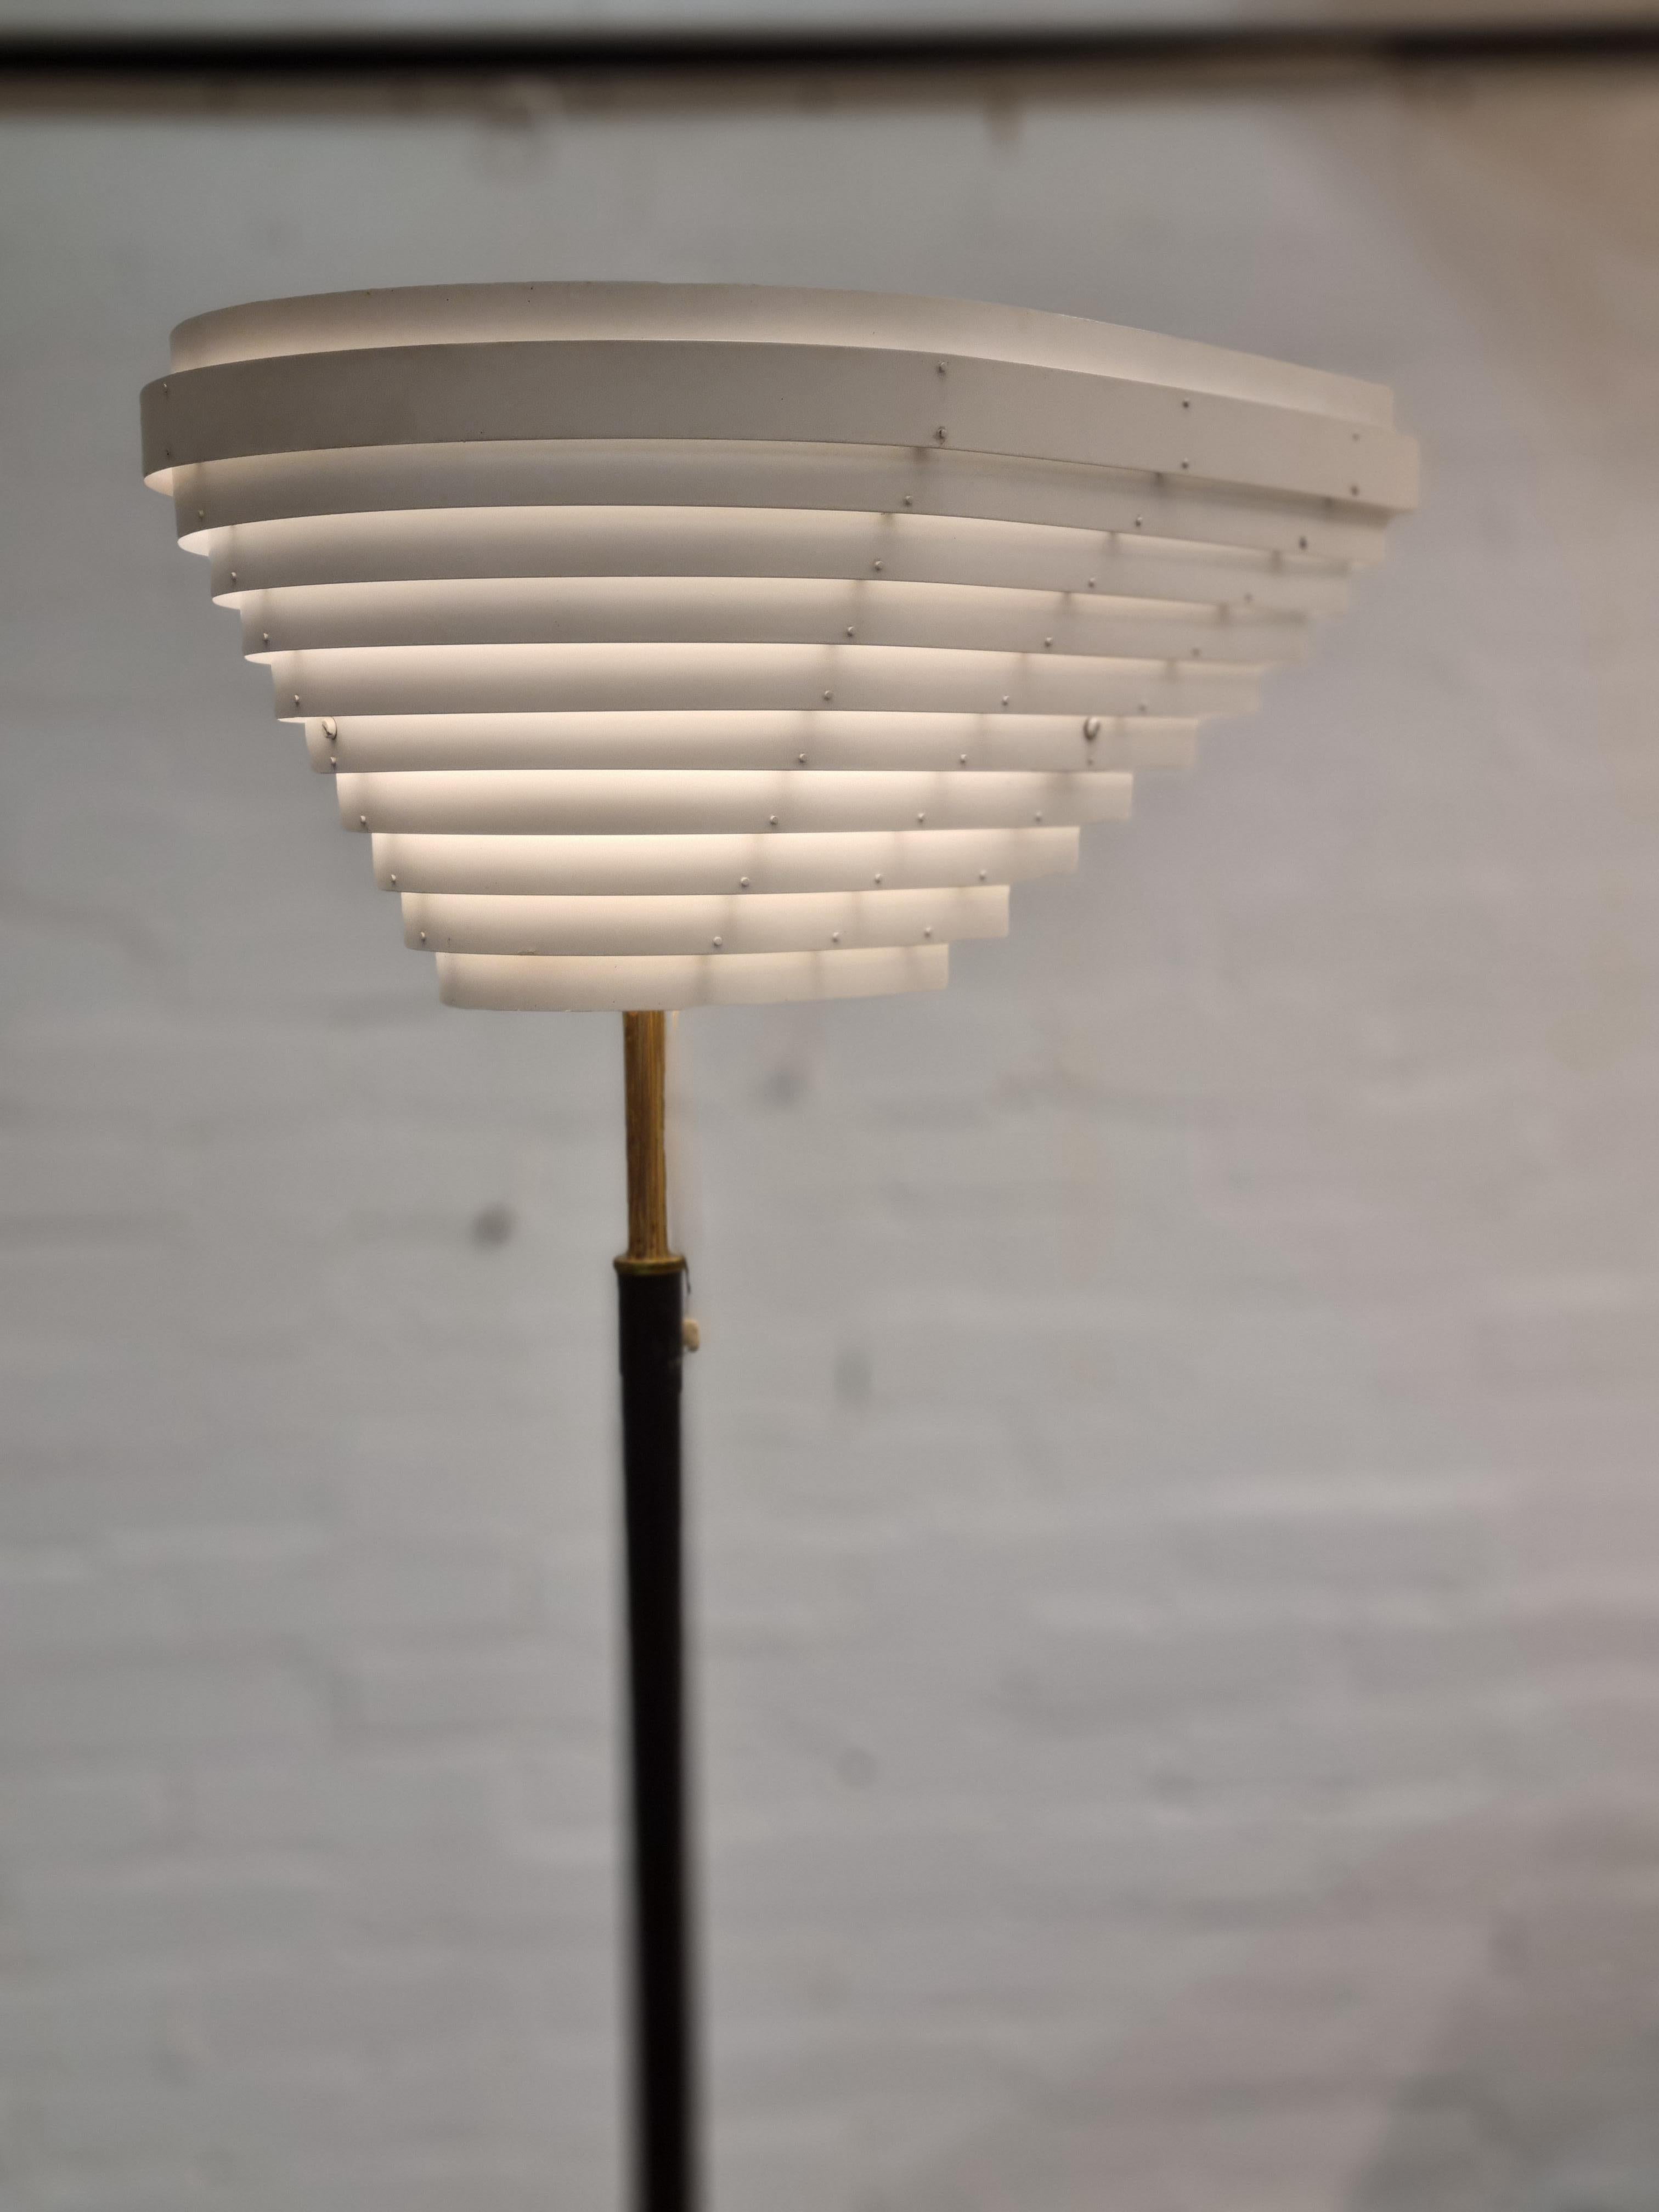 One of the most iconic lamps by Alvar Aalto, this impressive “Angel Wing” lamp was designed by Alvar Aalto in 1954 for the National Pensions Institute in Helsinki. 
The large asymmetrical wingshape shade is formed from painted metal strips. The